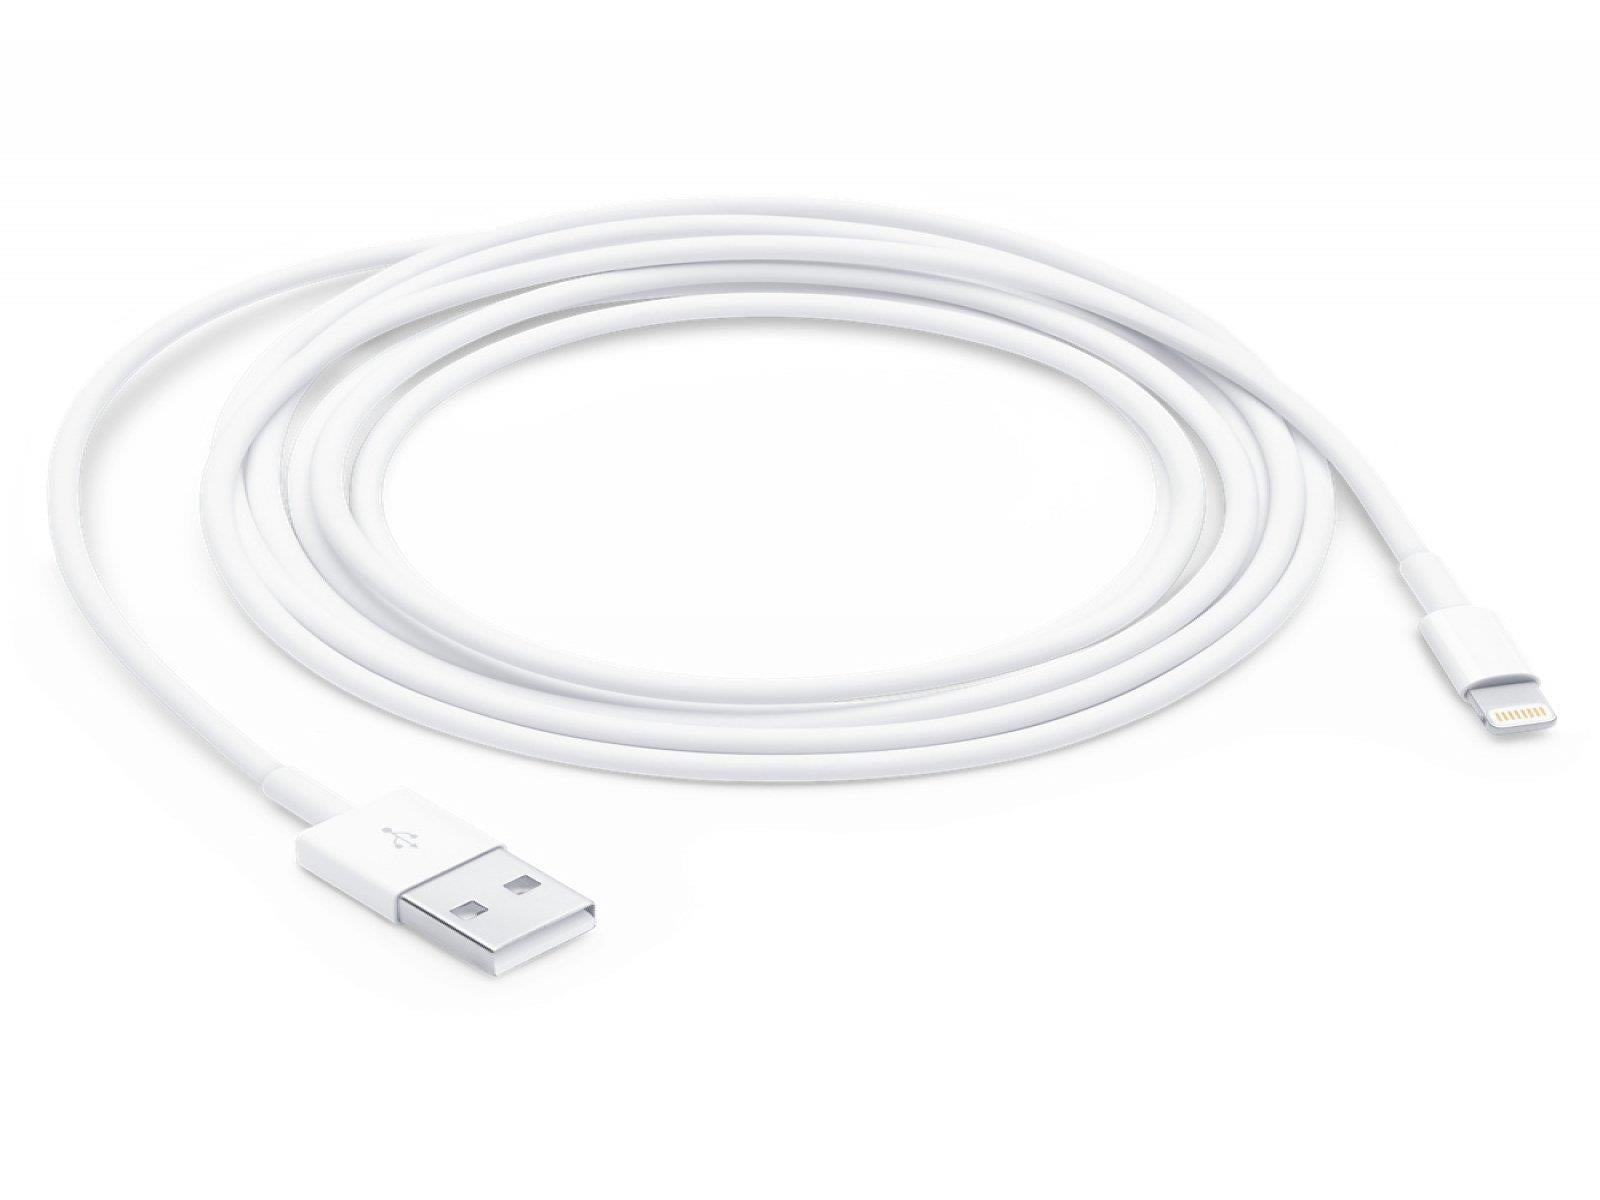 Apple Lighting Cable Showing Long Length